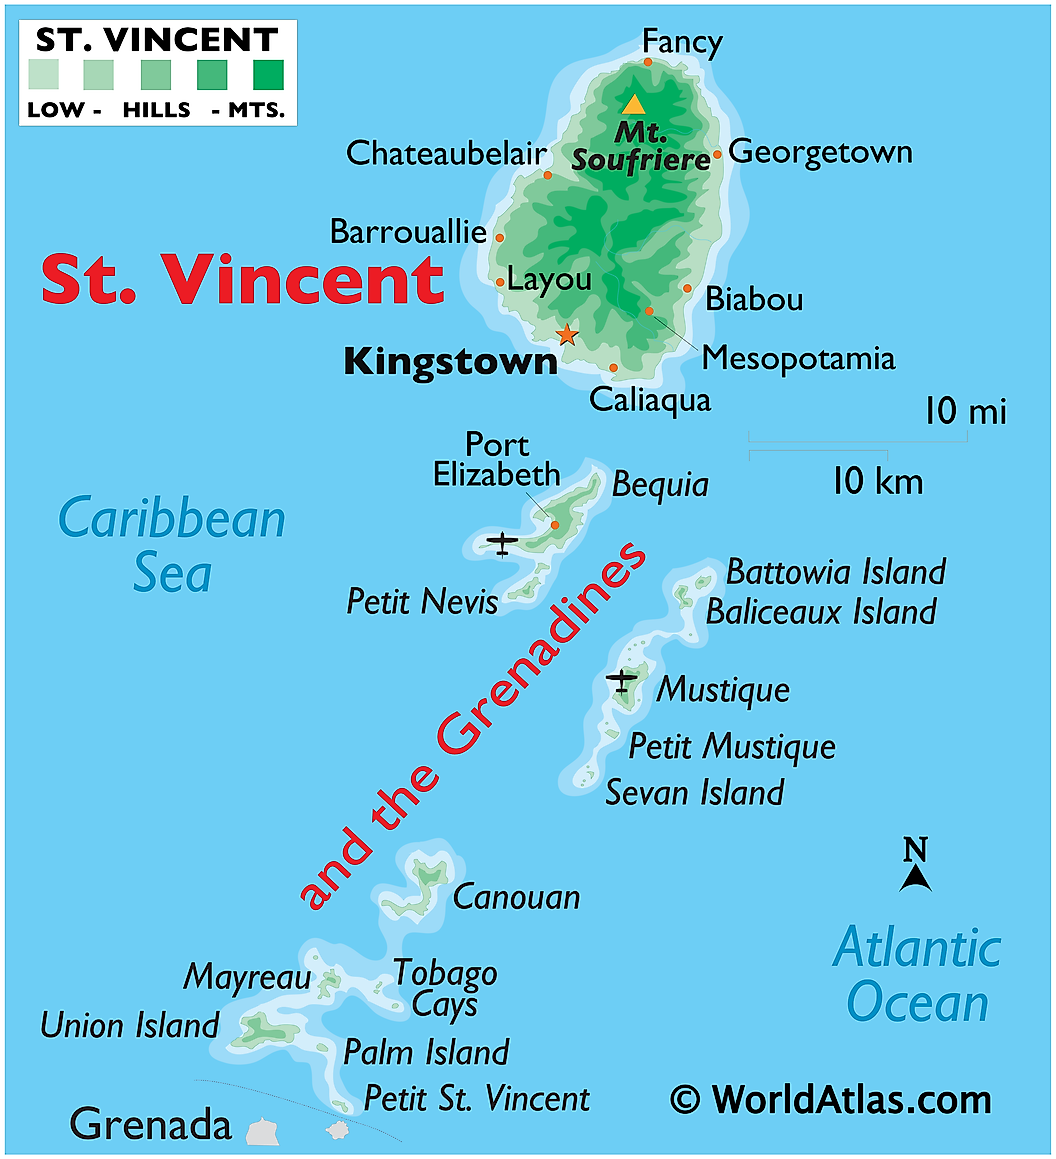 24100354 1 saint vincent and grenadines map